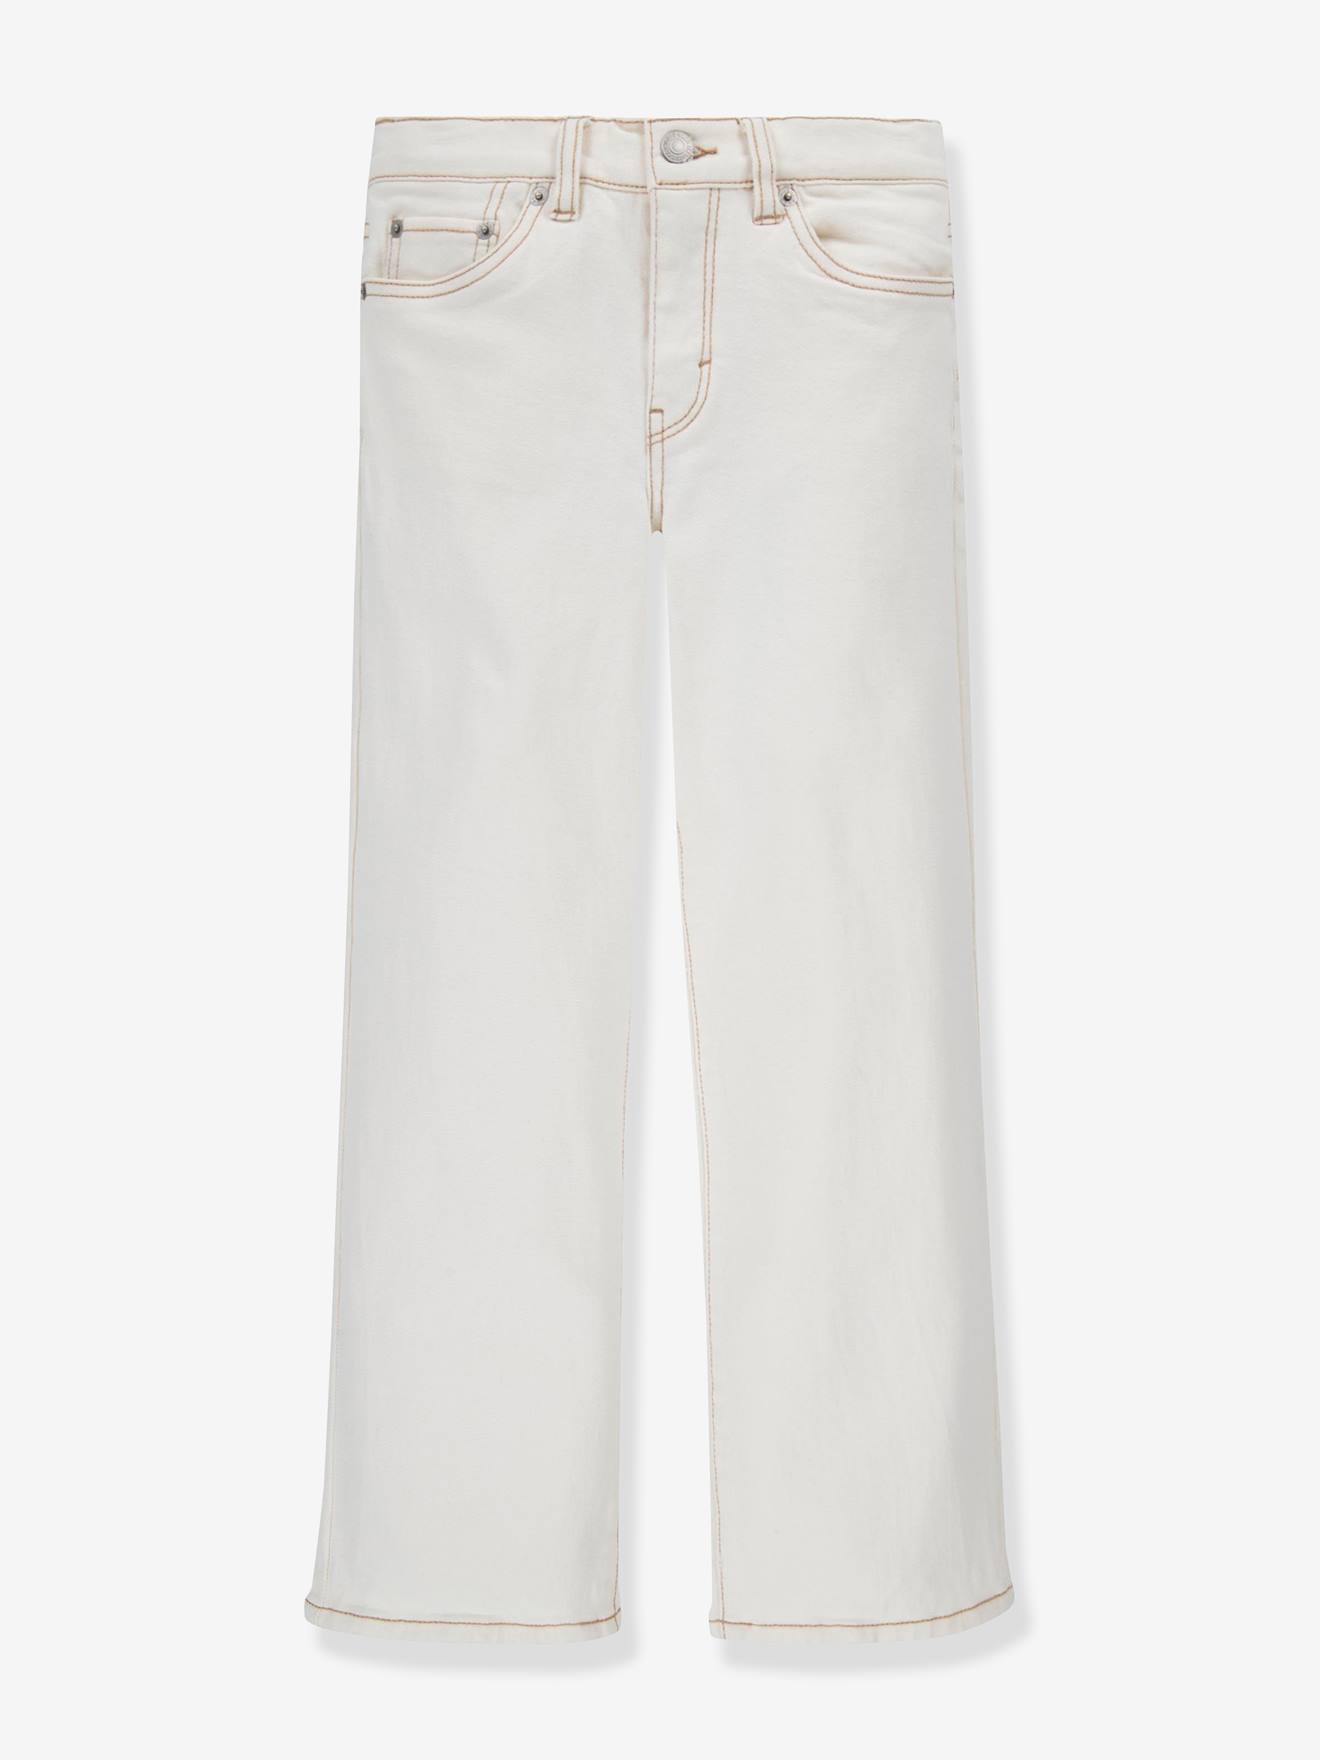 Wide Leg Jeans for Girls, by Levi’s(r) ecru